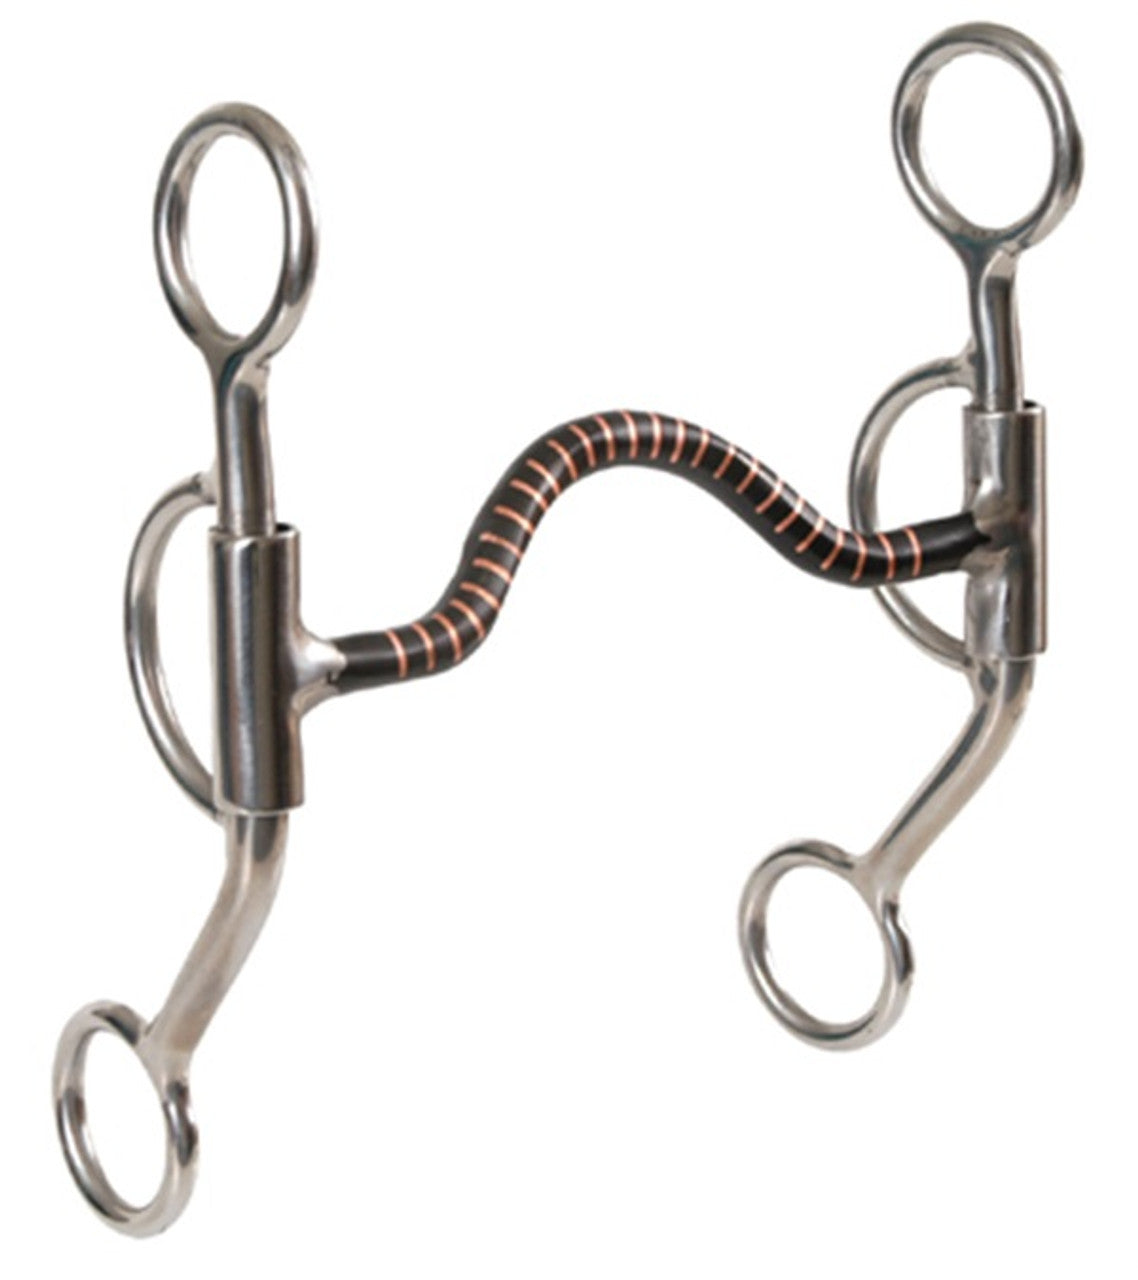 Copper Inlaid Stainless Steel Training Snaffle Bit-TexanSaddles.com